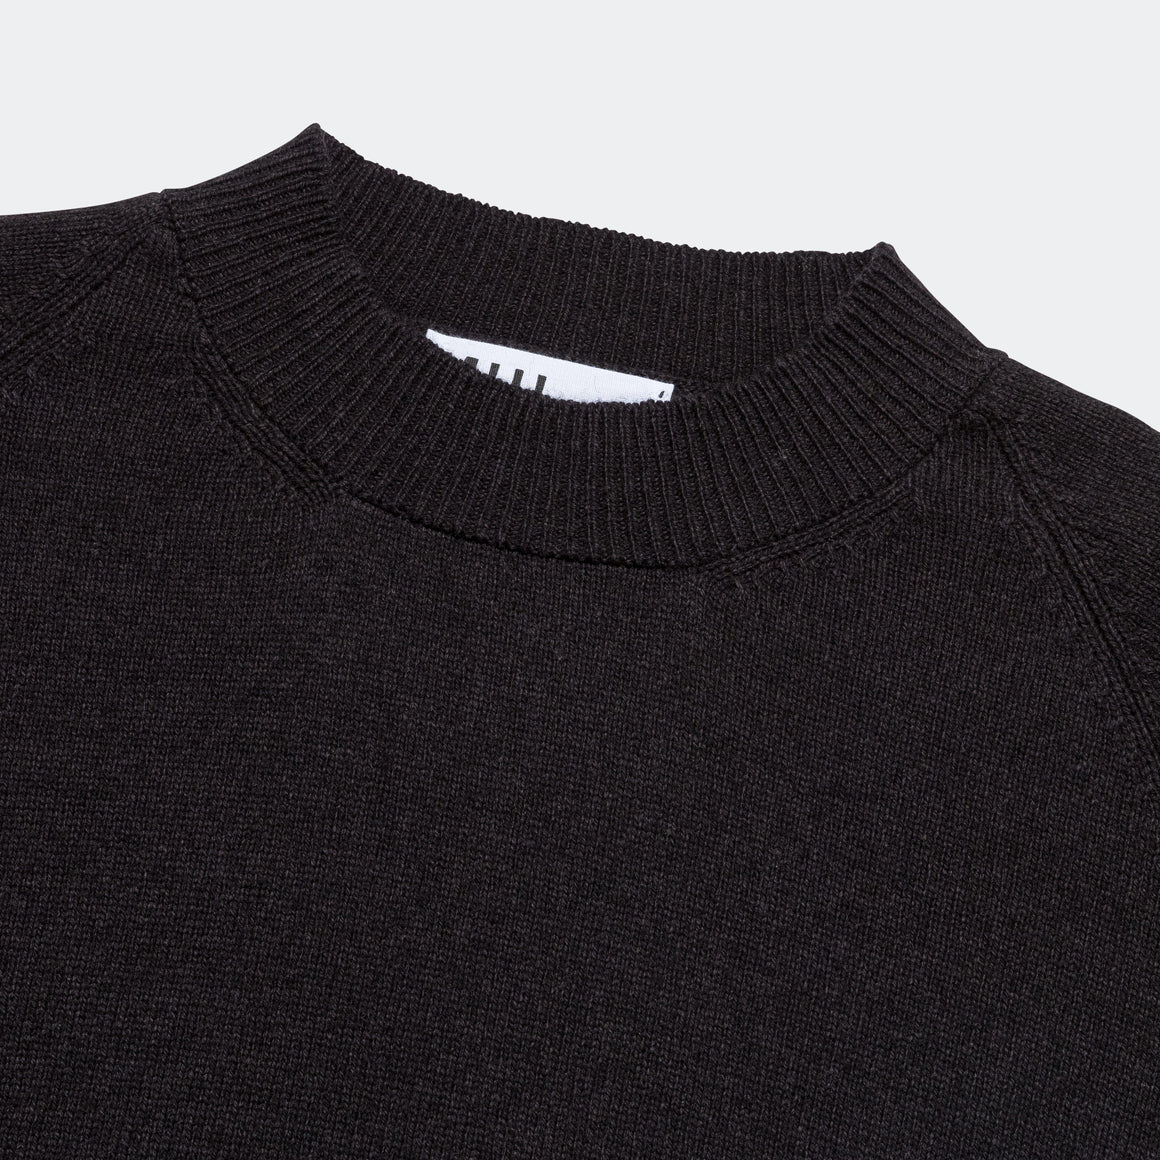 MHL. - Crew Neck - Carbon Wool Cotton - UP THERE